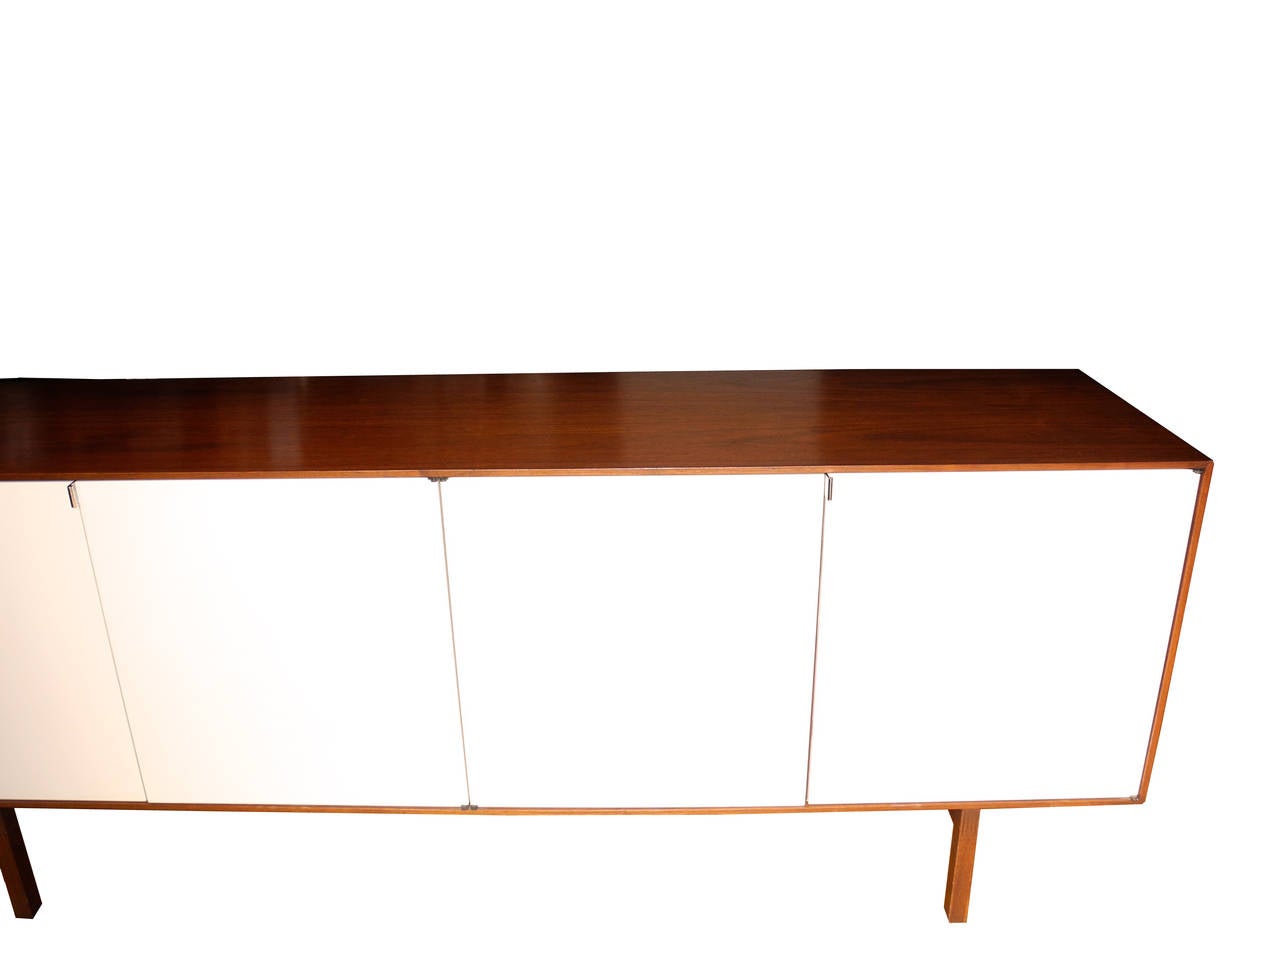 American Modern Walnut Case Sideboard, Credenza or Storage Cabinet by Florence Knoll